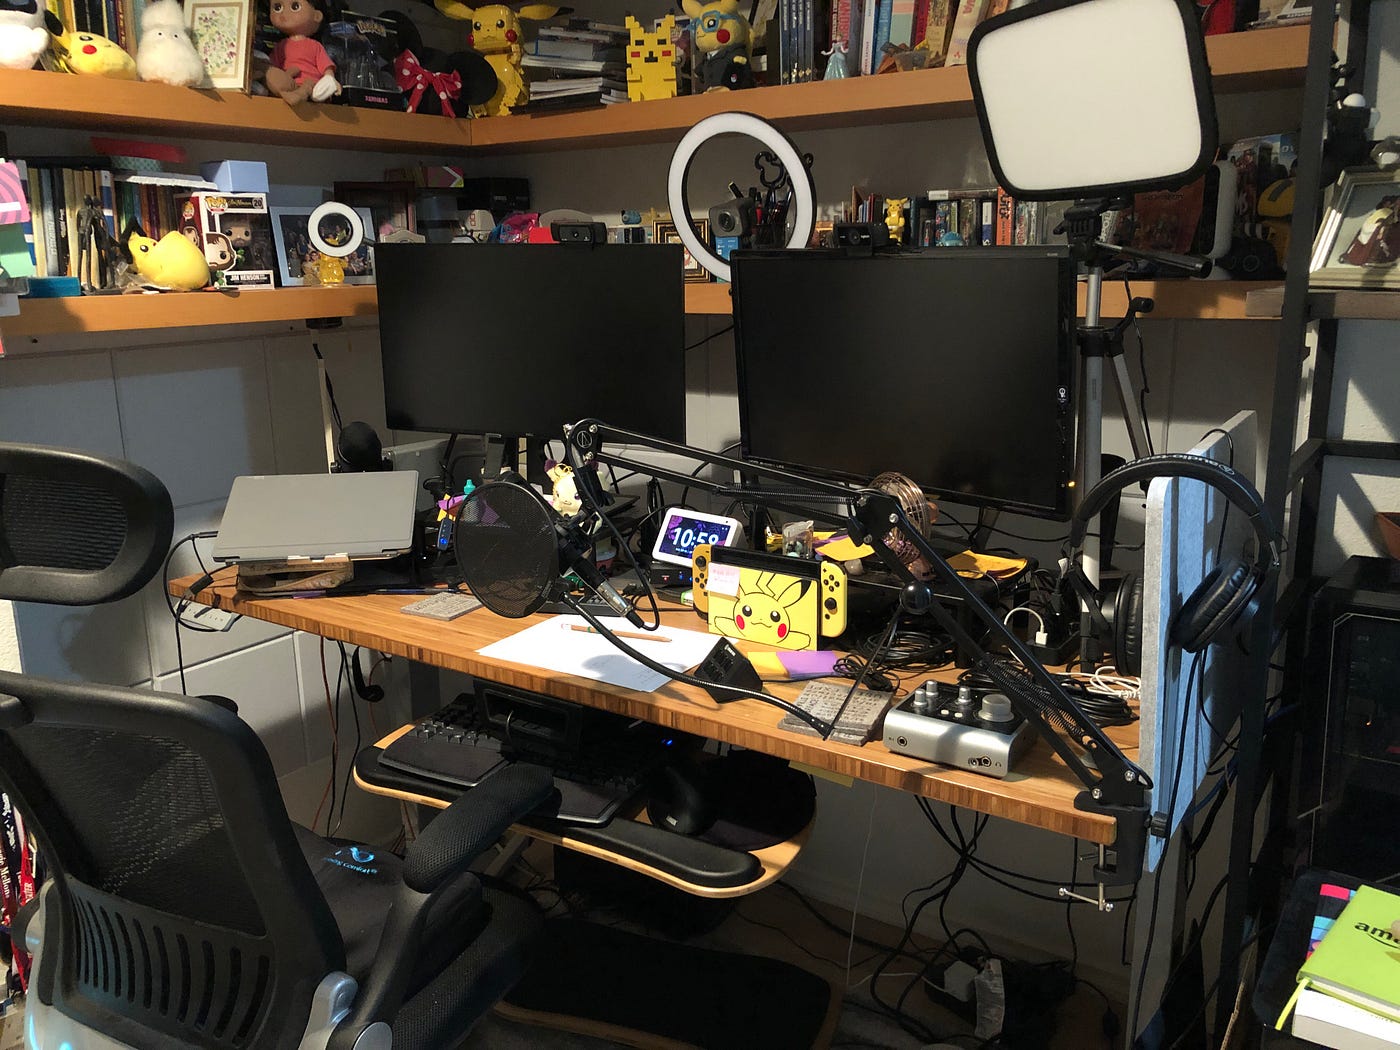 Work/Gaming setup. Looking for a good streaming mic and camera